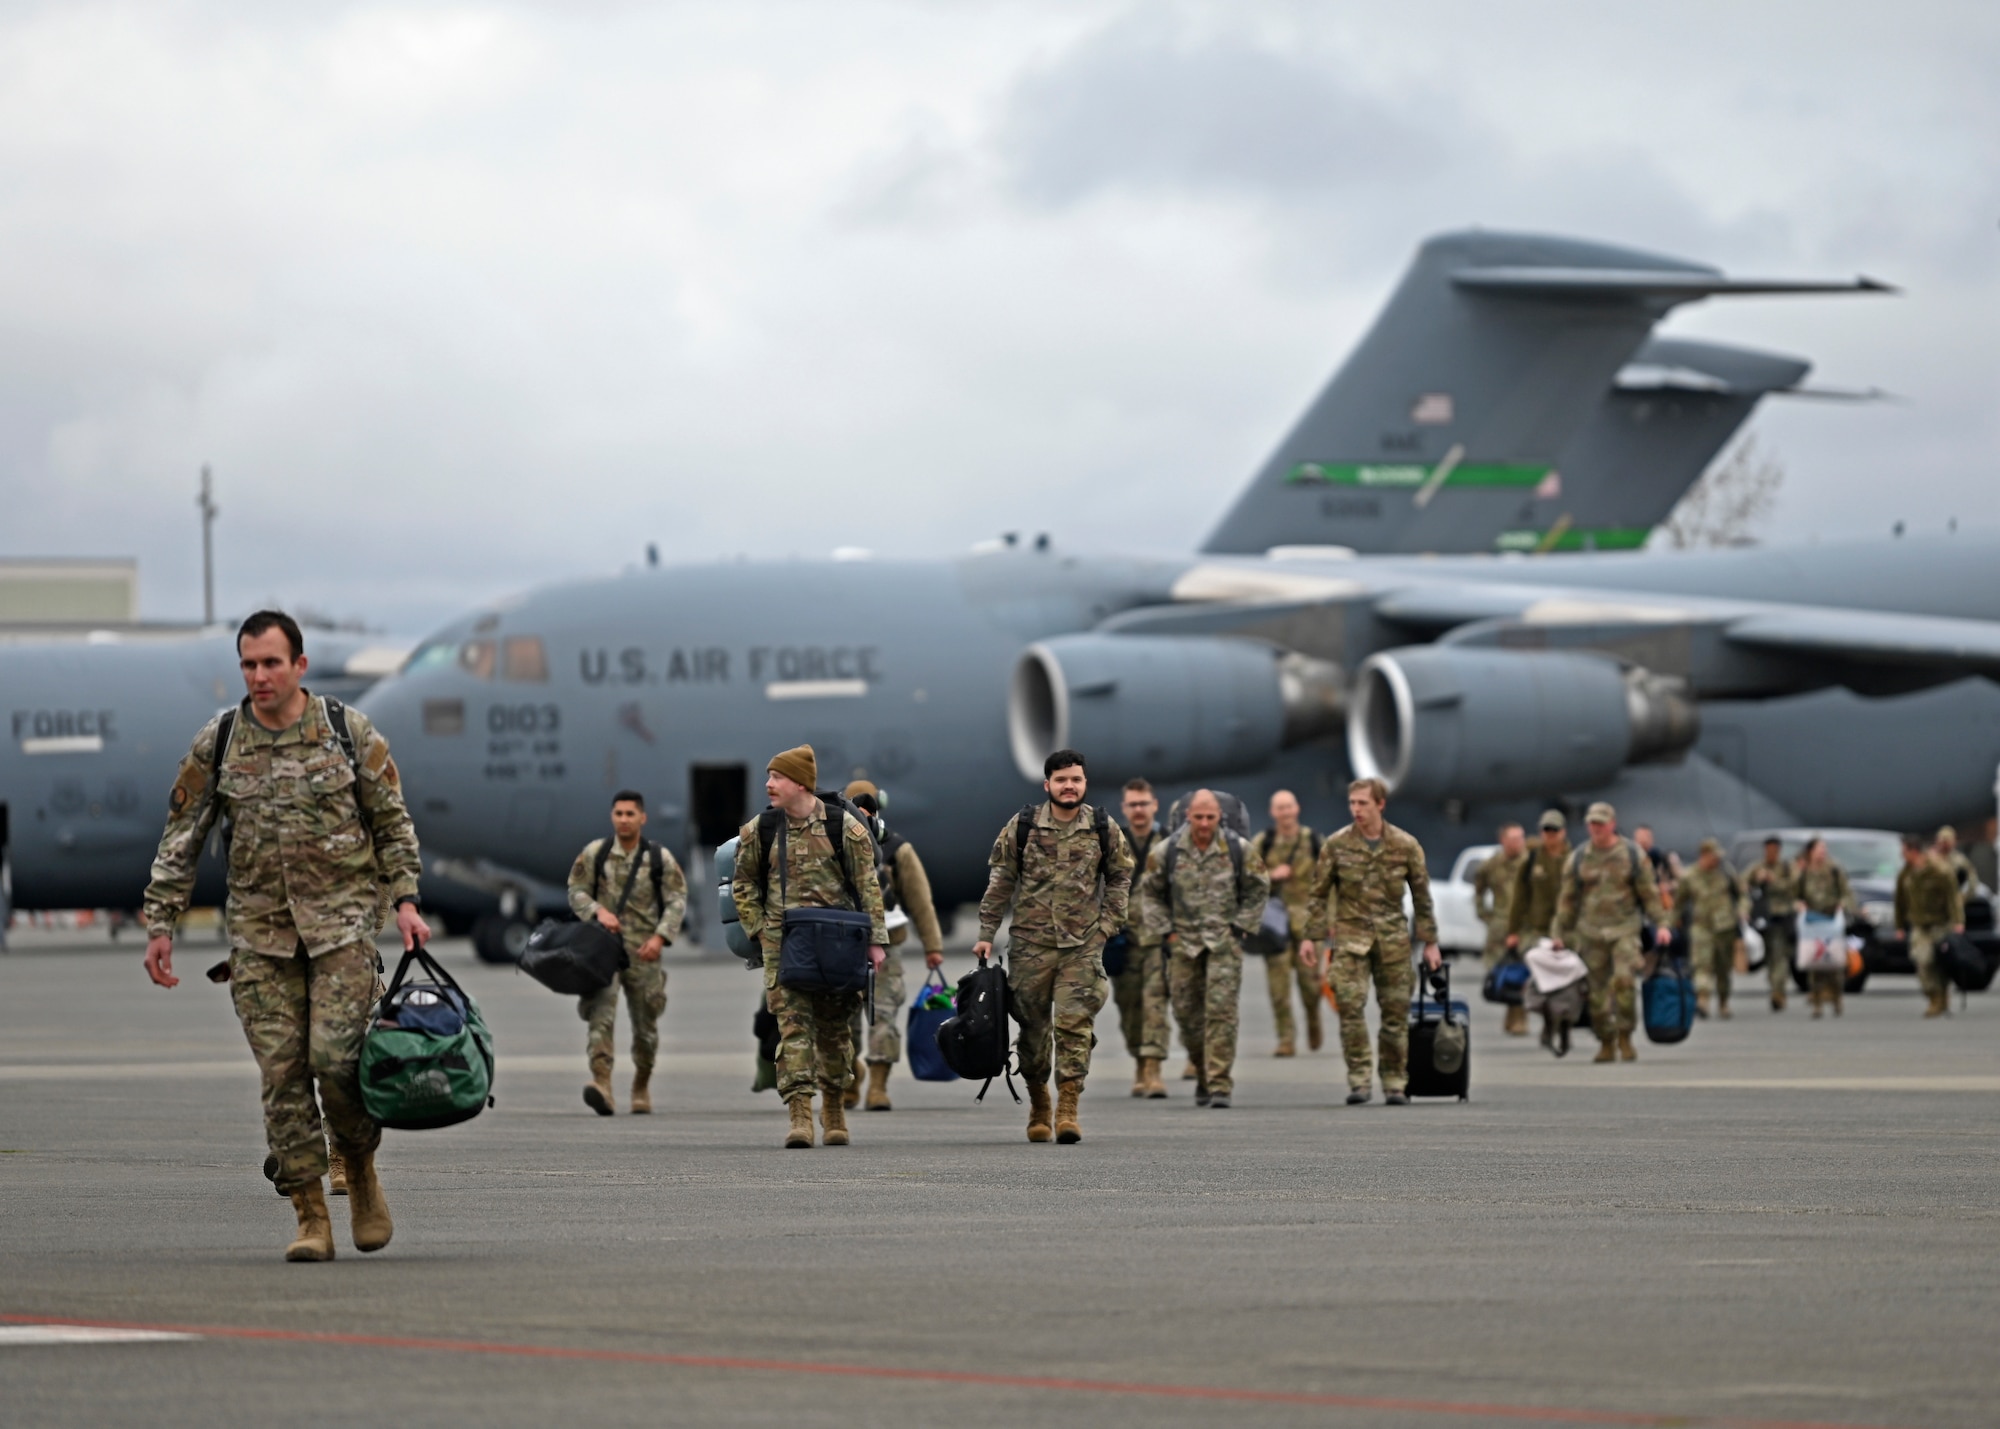 U.S. Airmen with the 62d Airlift Wing return from a deployment at Joint Base Lewis-McChord, Washington, April 4, 2023. This deployment was the 62d Airlift Wing’s first under the new Air Force Force Generation Model in support of U.S. Central Command, U.S. European Command and U.S. Africa Command operations. The new AFFORGEN model aims to reconstitute Air Mobility Command’s manpower, aircraft and equipment into force elements that train, deploy and recover as cohesive units throughout each phase of the cycle. (U.S. Air Force photo by Senior Airman Callie Norton)